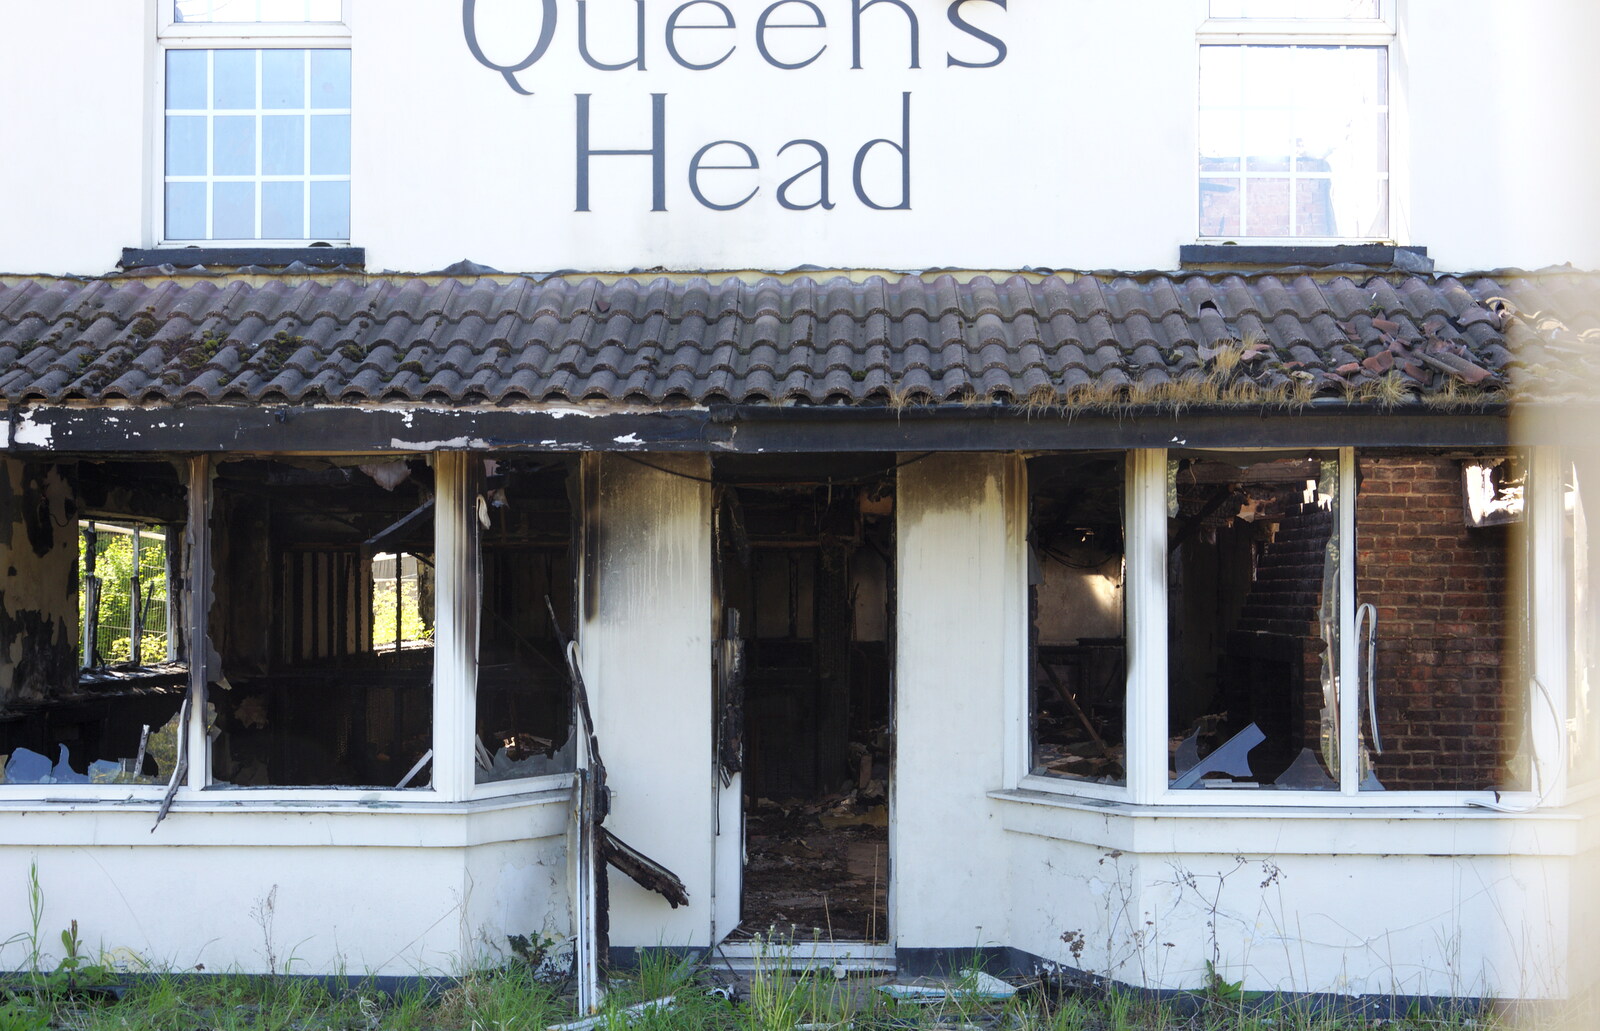 A sad sight of the Queen's Head, on the A120 in Surrex from The BSCC Bike Ride 2019, Coggeshall, Essex - 11th May 2019